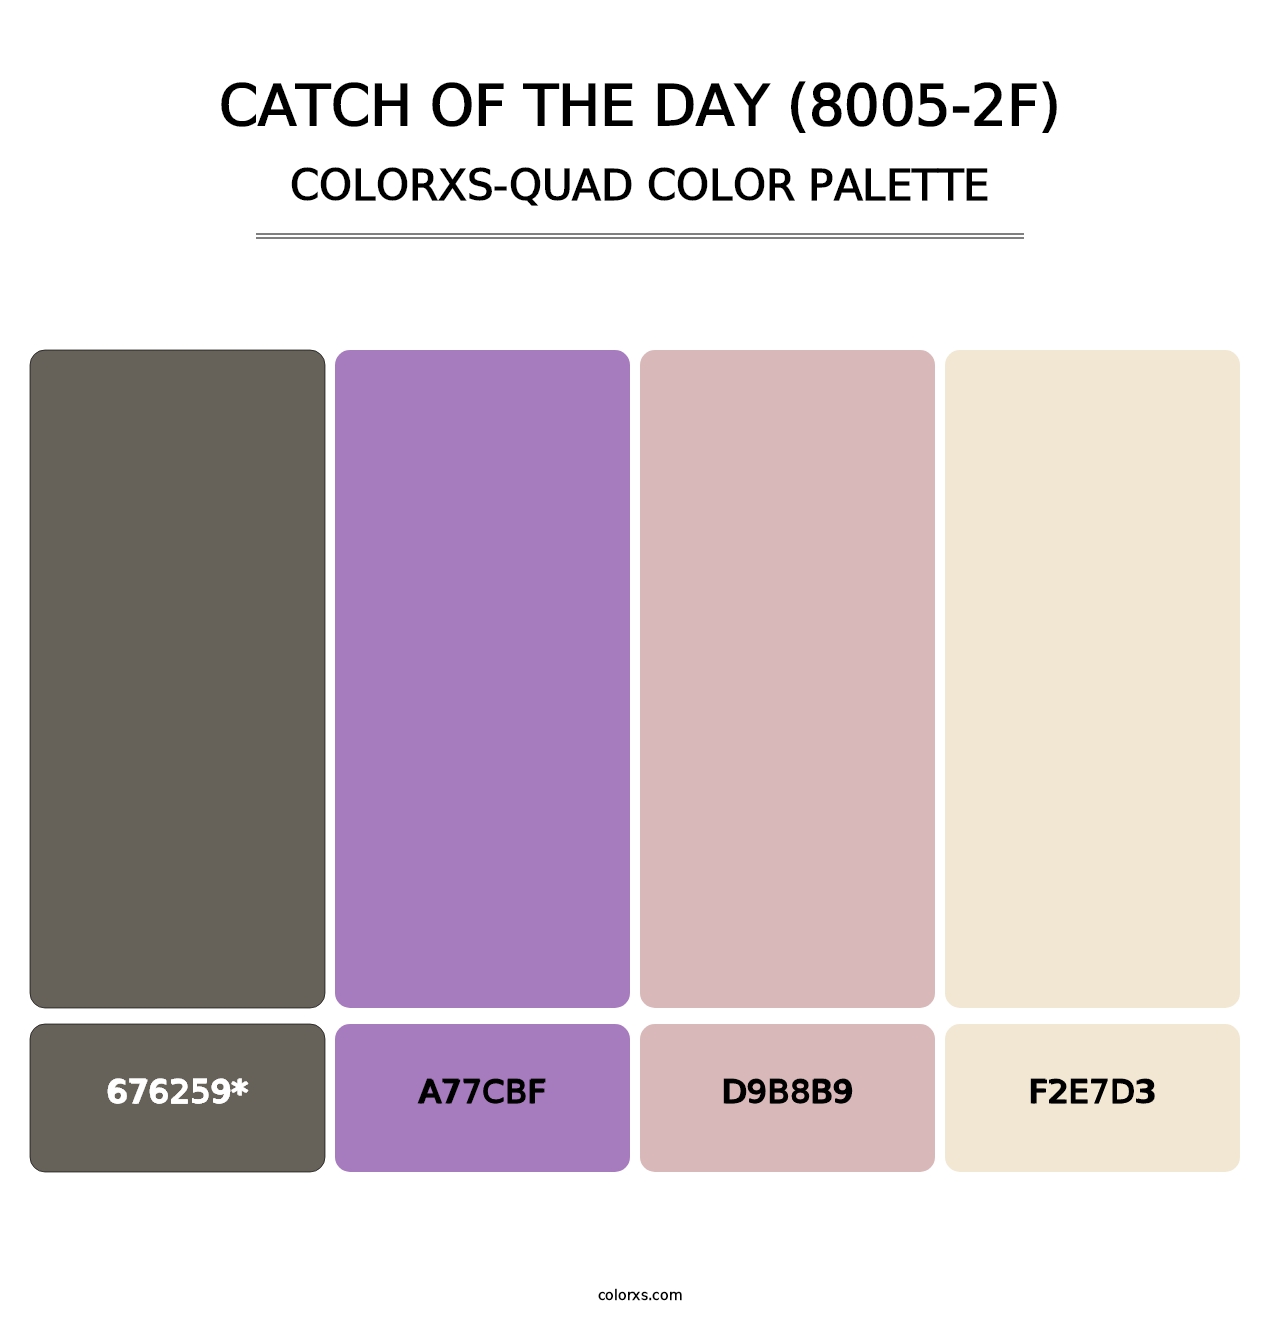 Catch of the Day (8005-2F) - Colorxs Quad Palette